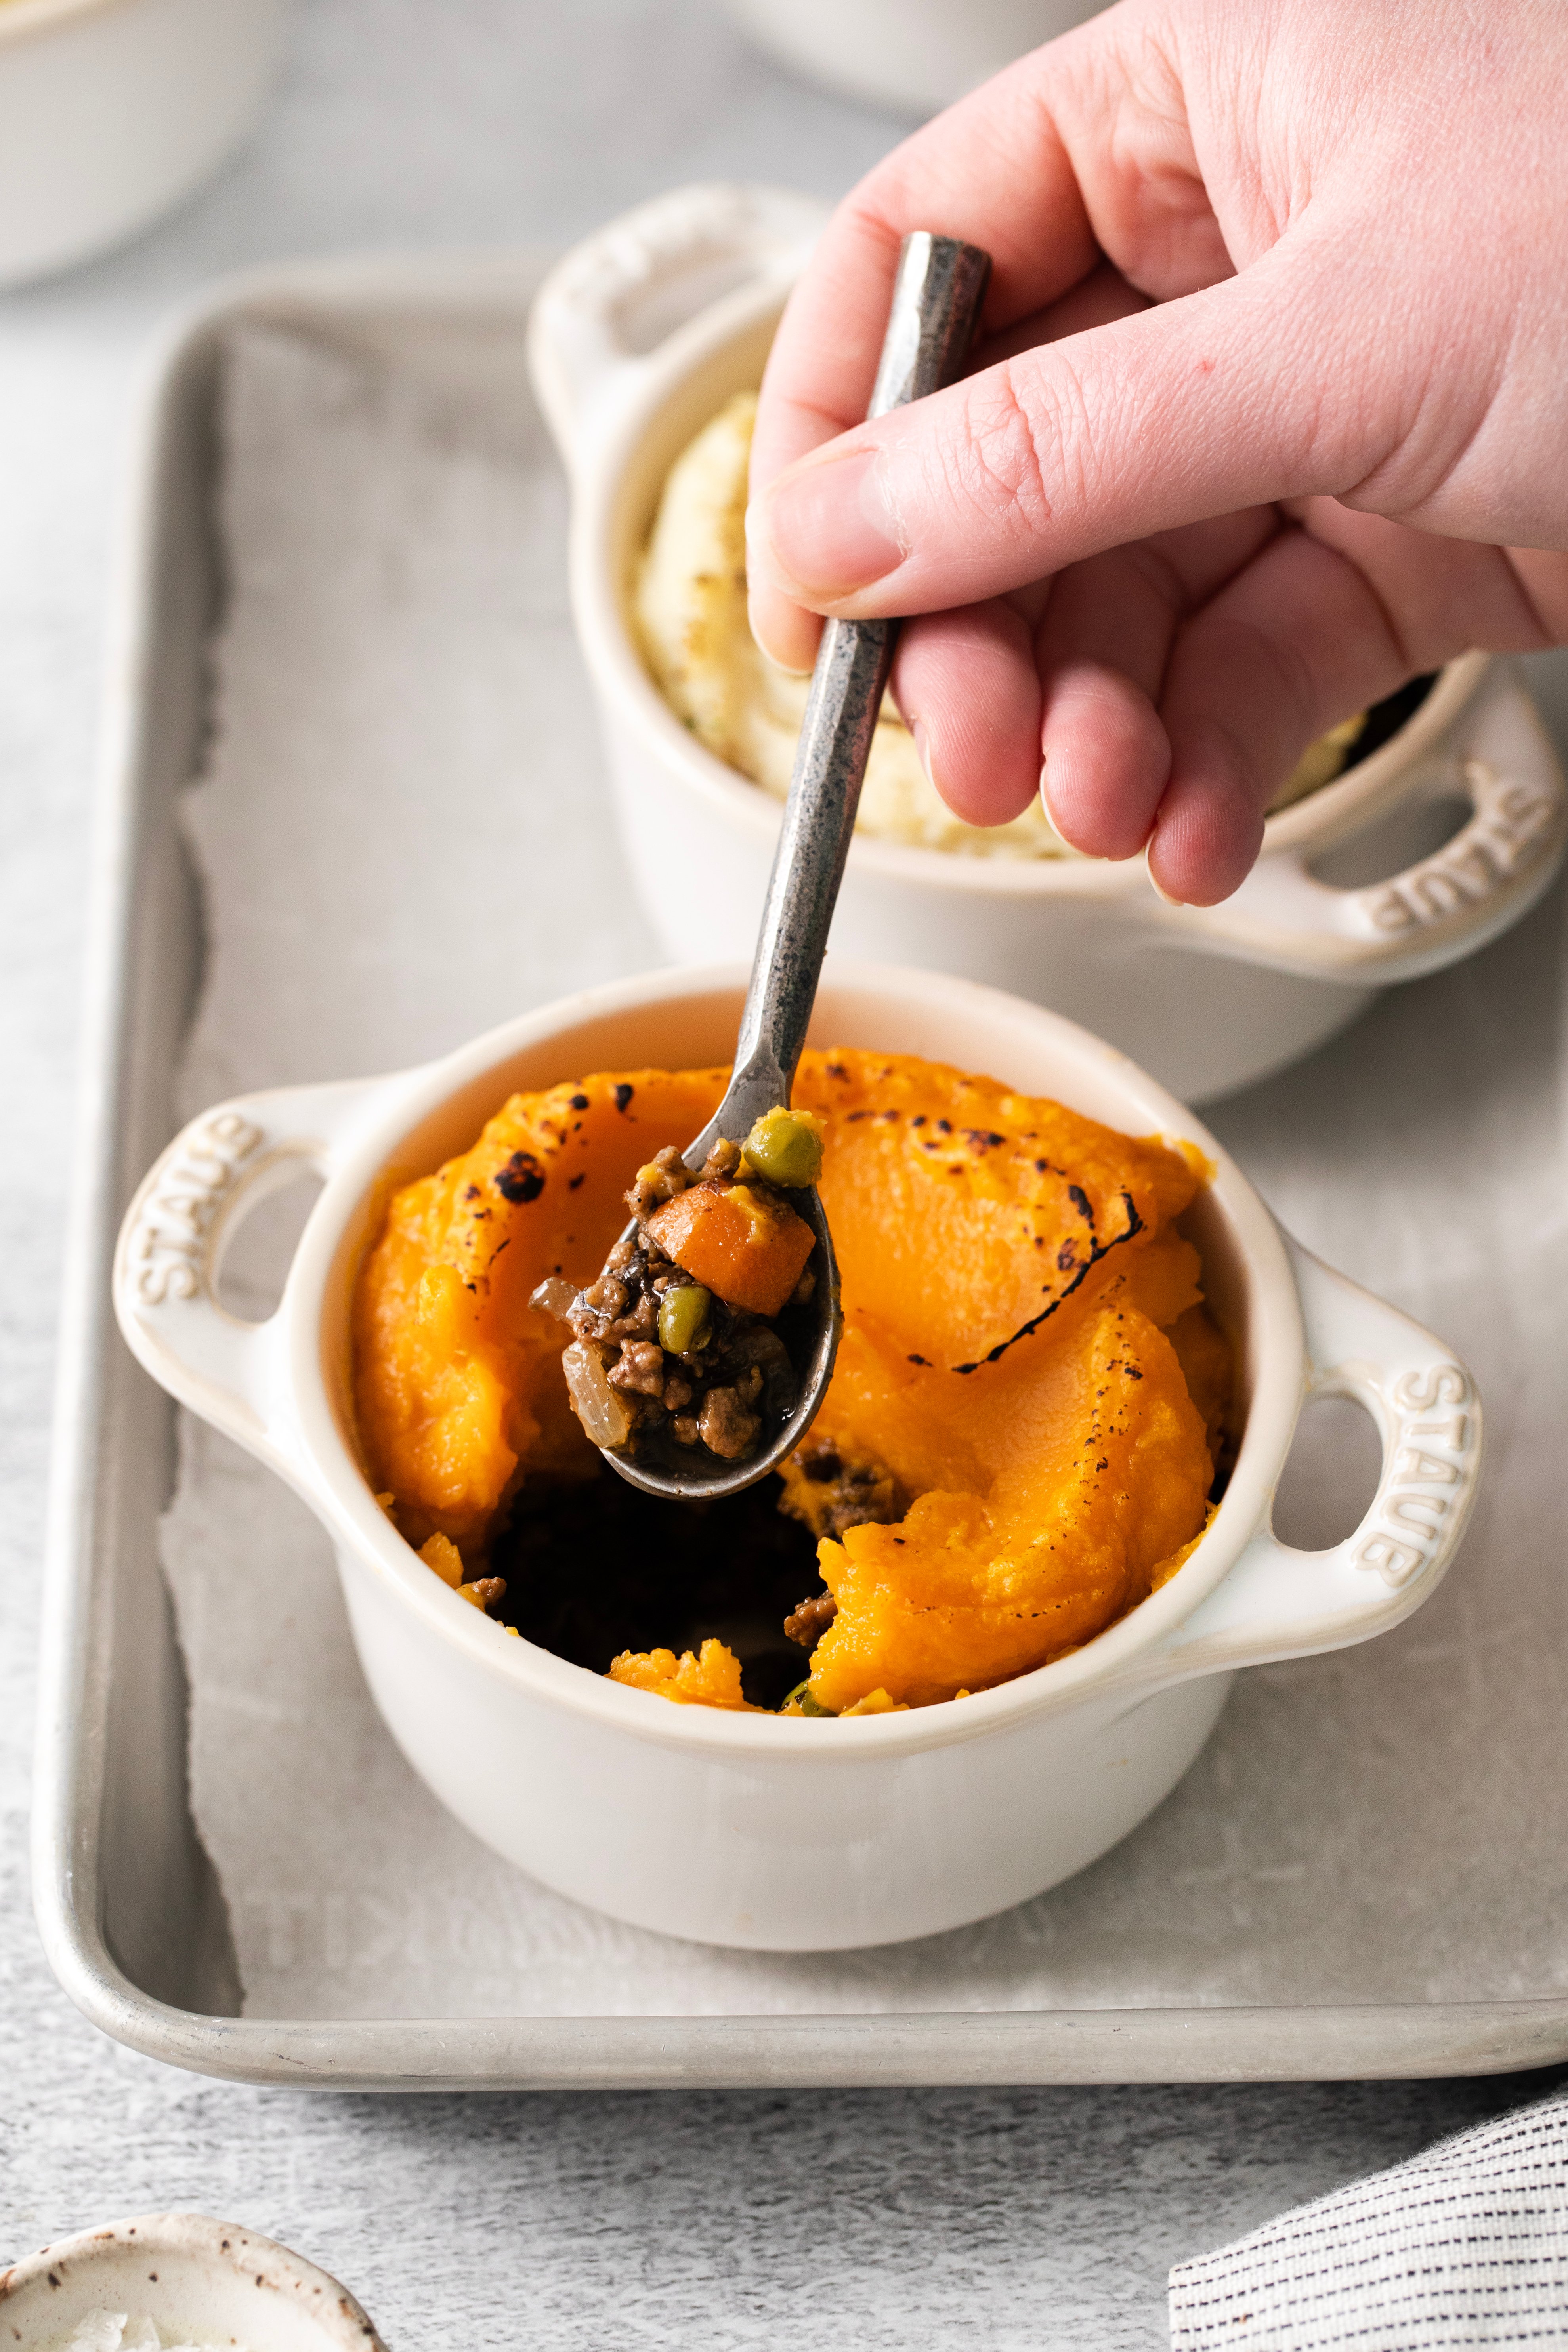 A spoon is dipped into a bowl filled with sweet potato shepherd's pie.